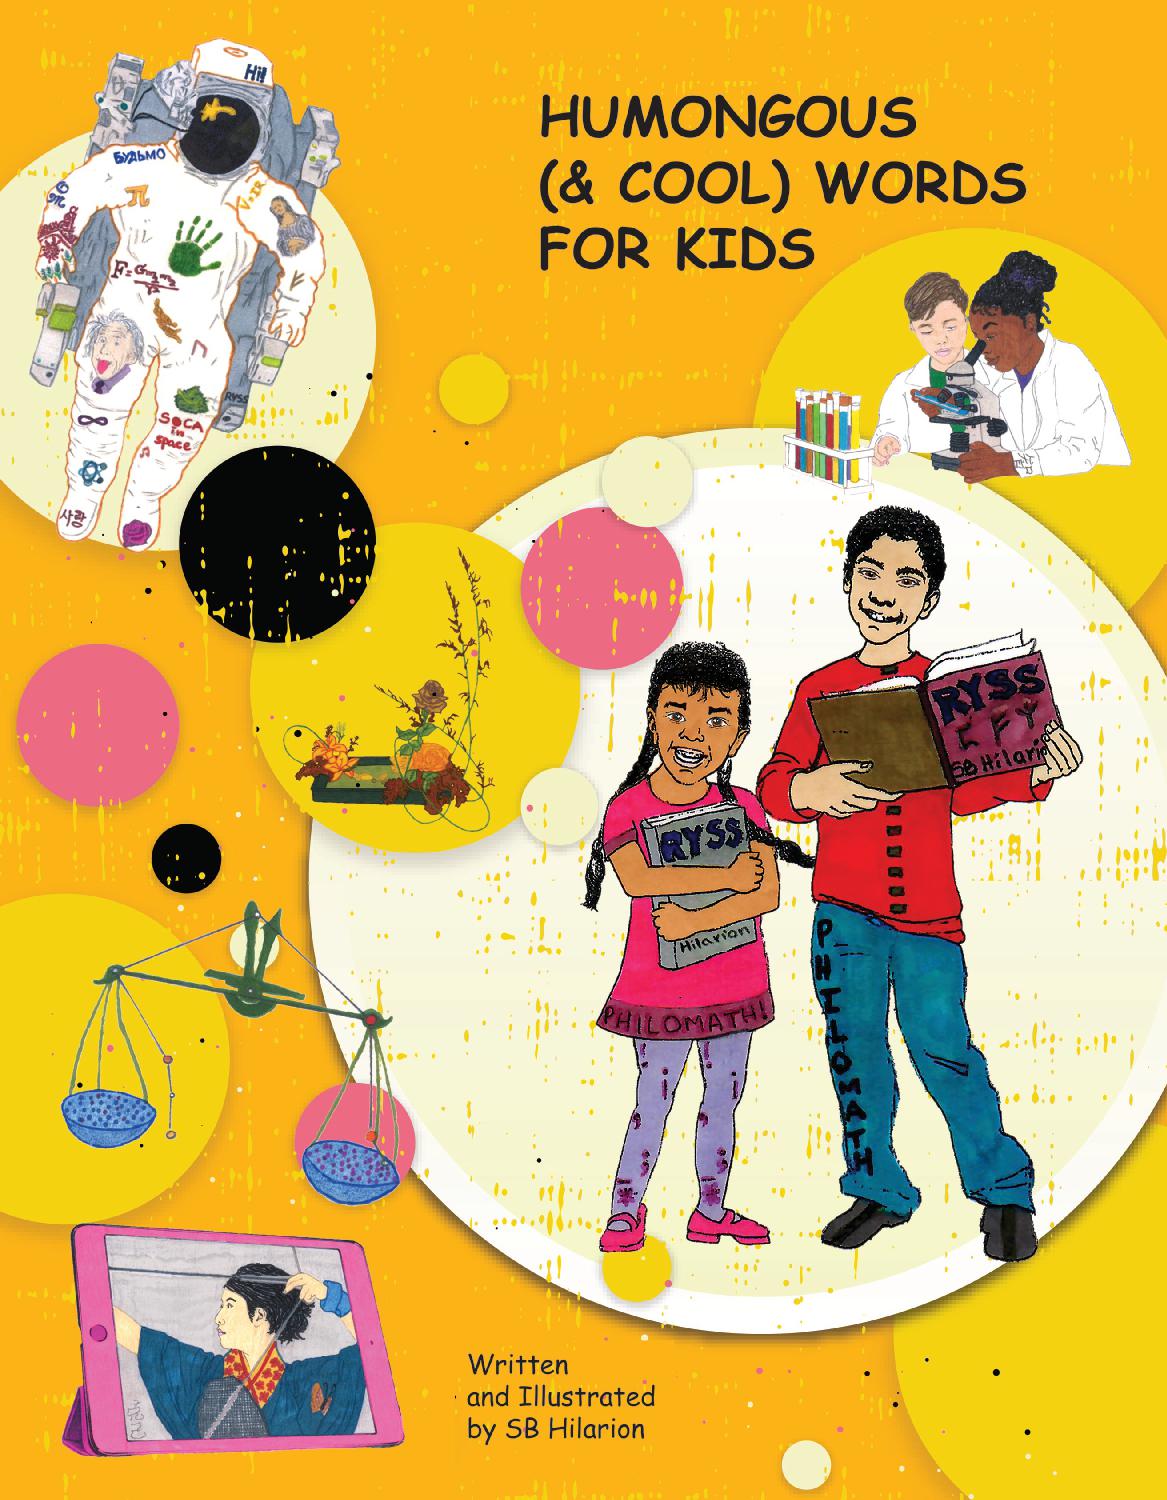 Humongous (& Cool) Words For Kids by SB Hilarion